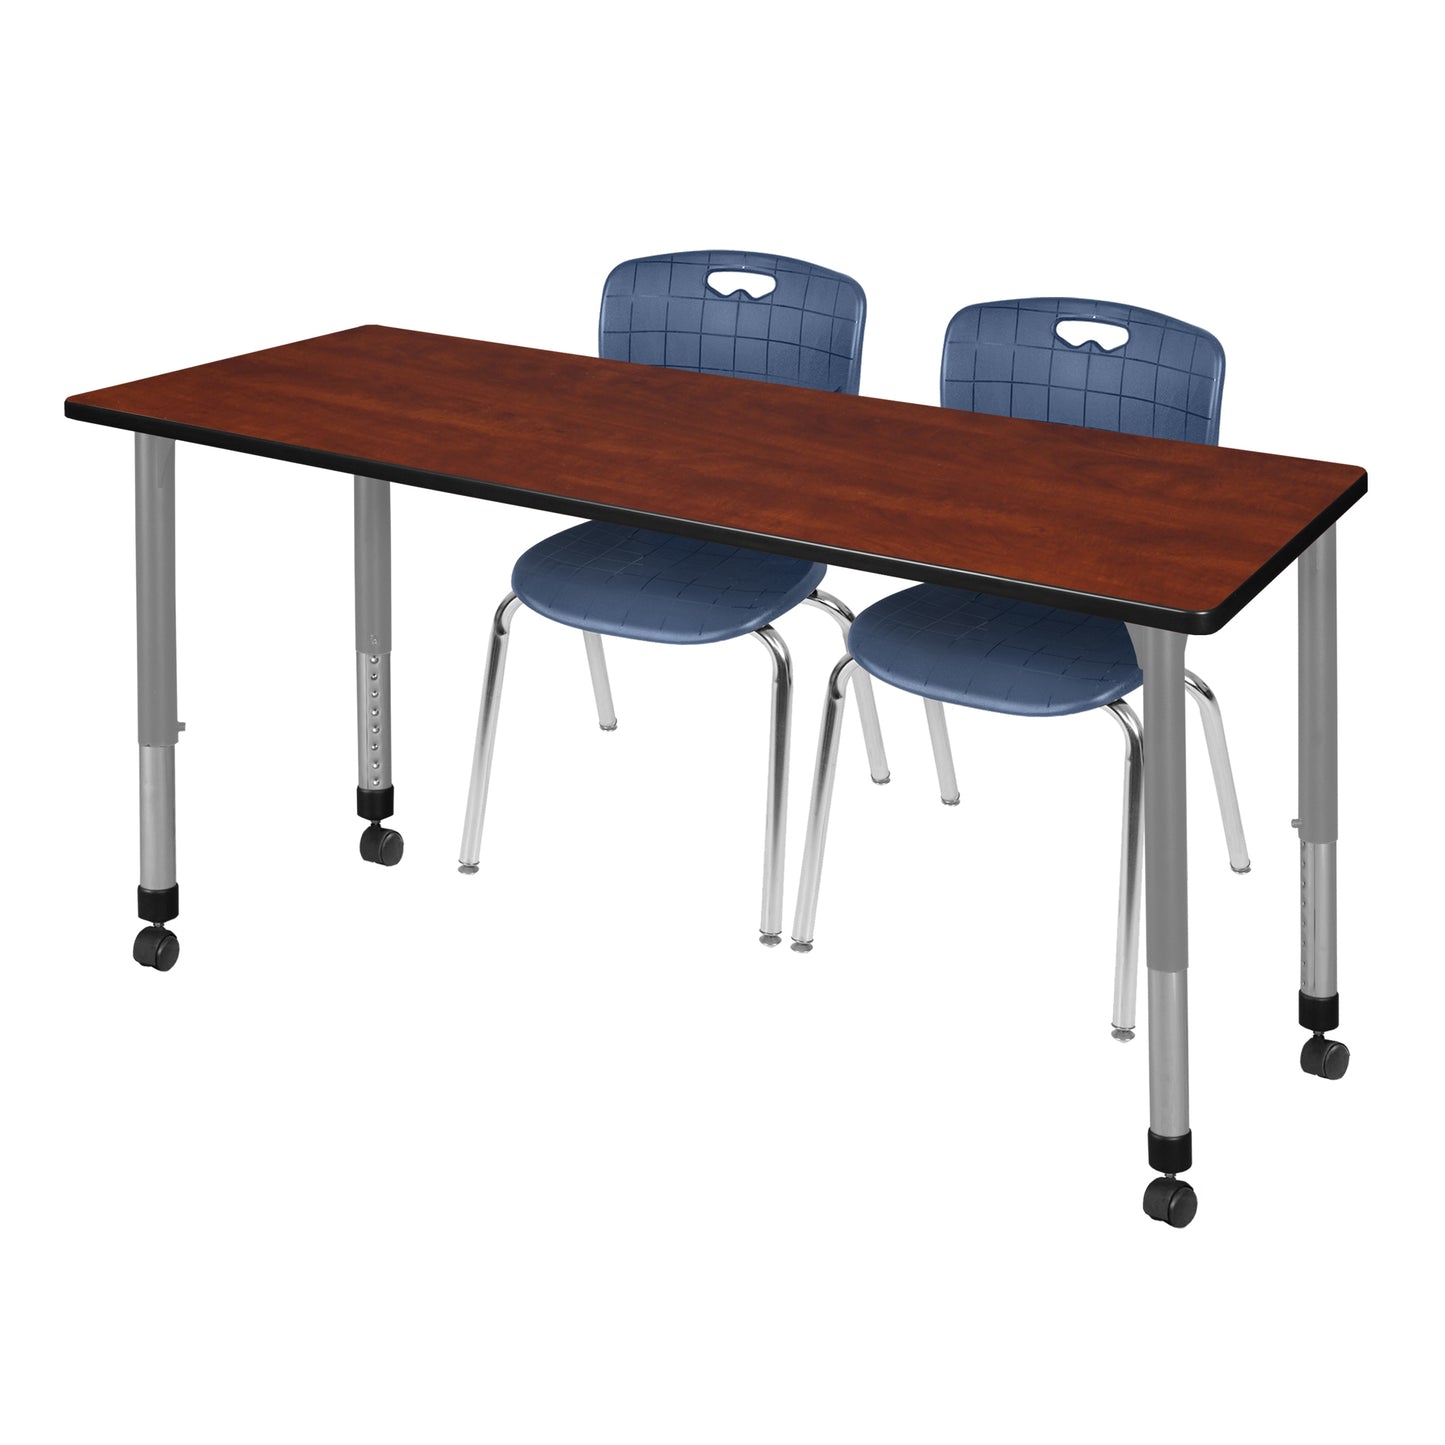 Regency Kee 66 x 30 in. Adjustable Classroom Table & 2 Andy 18 in. Stack Chairs